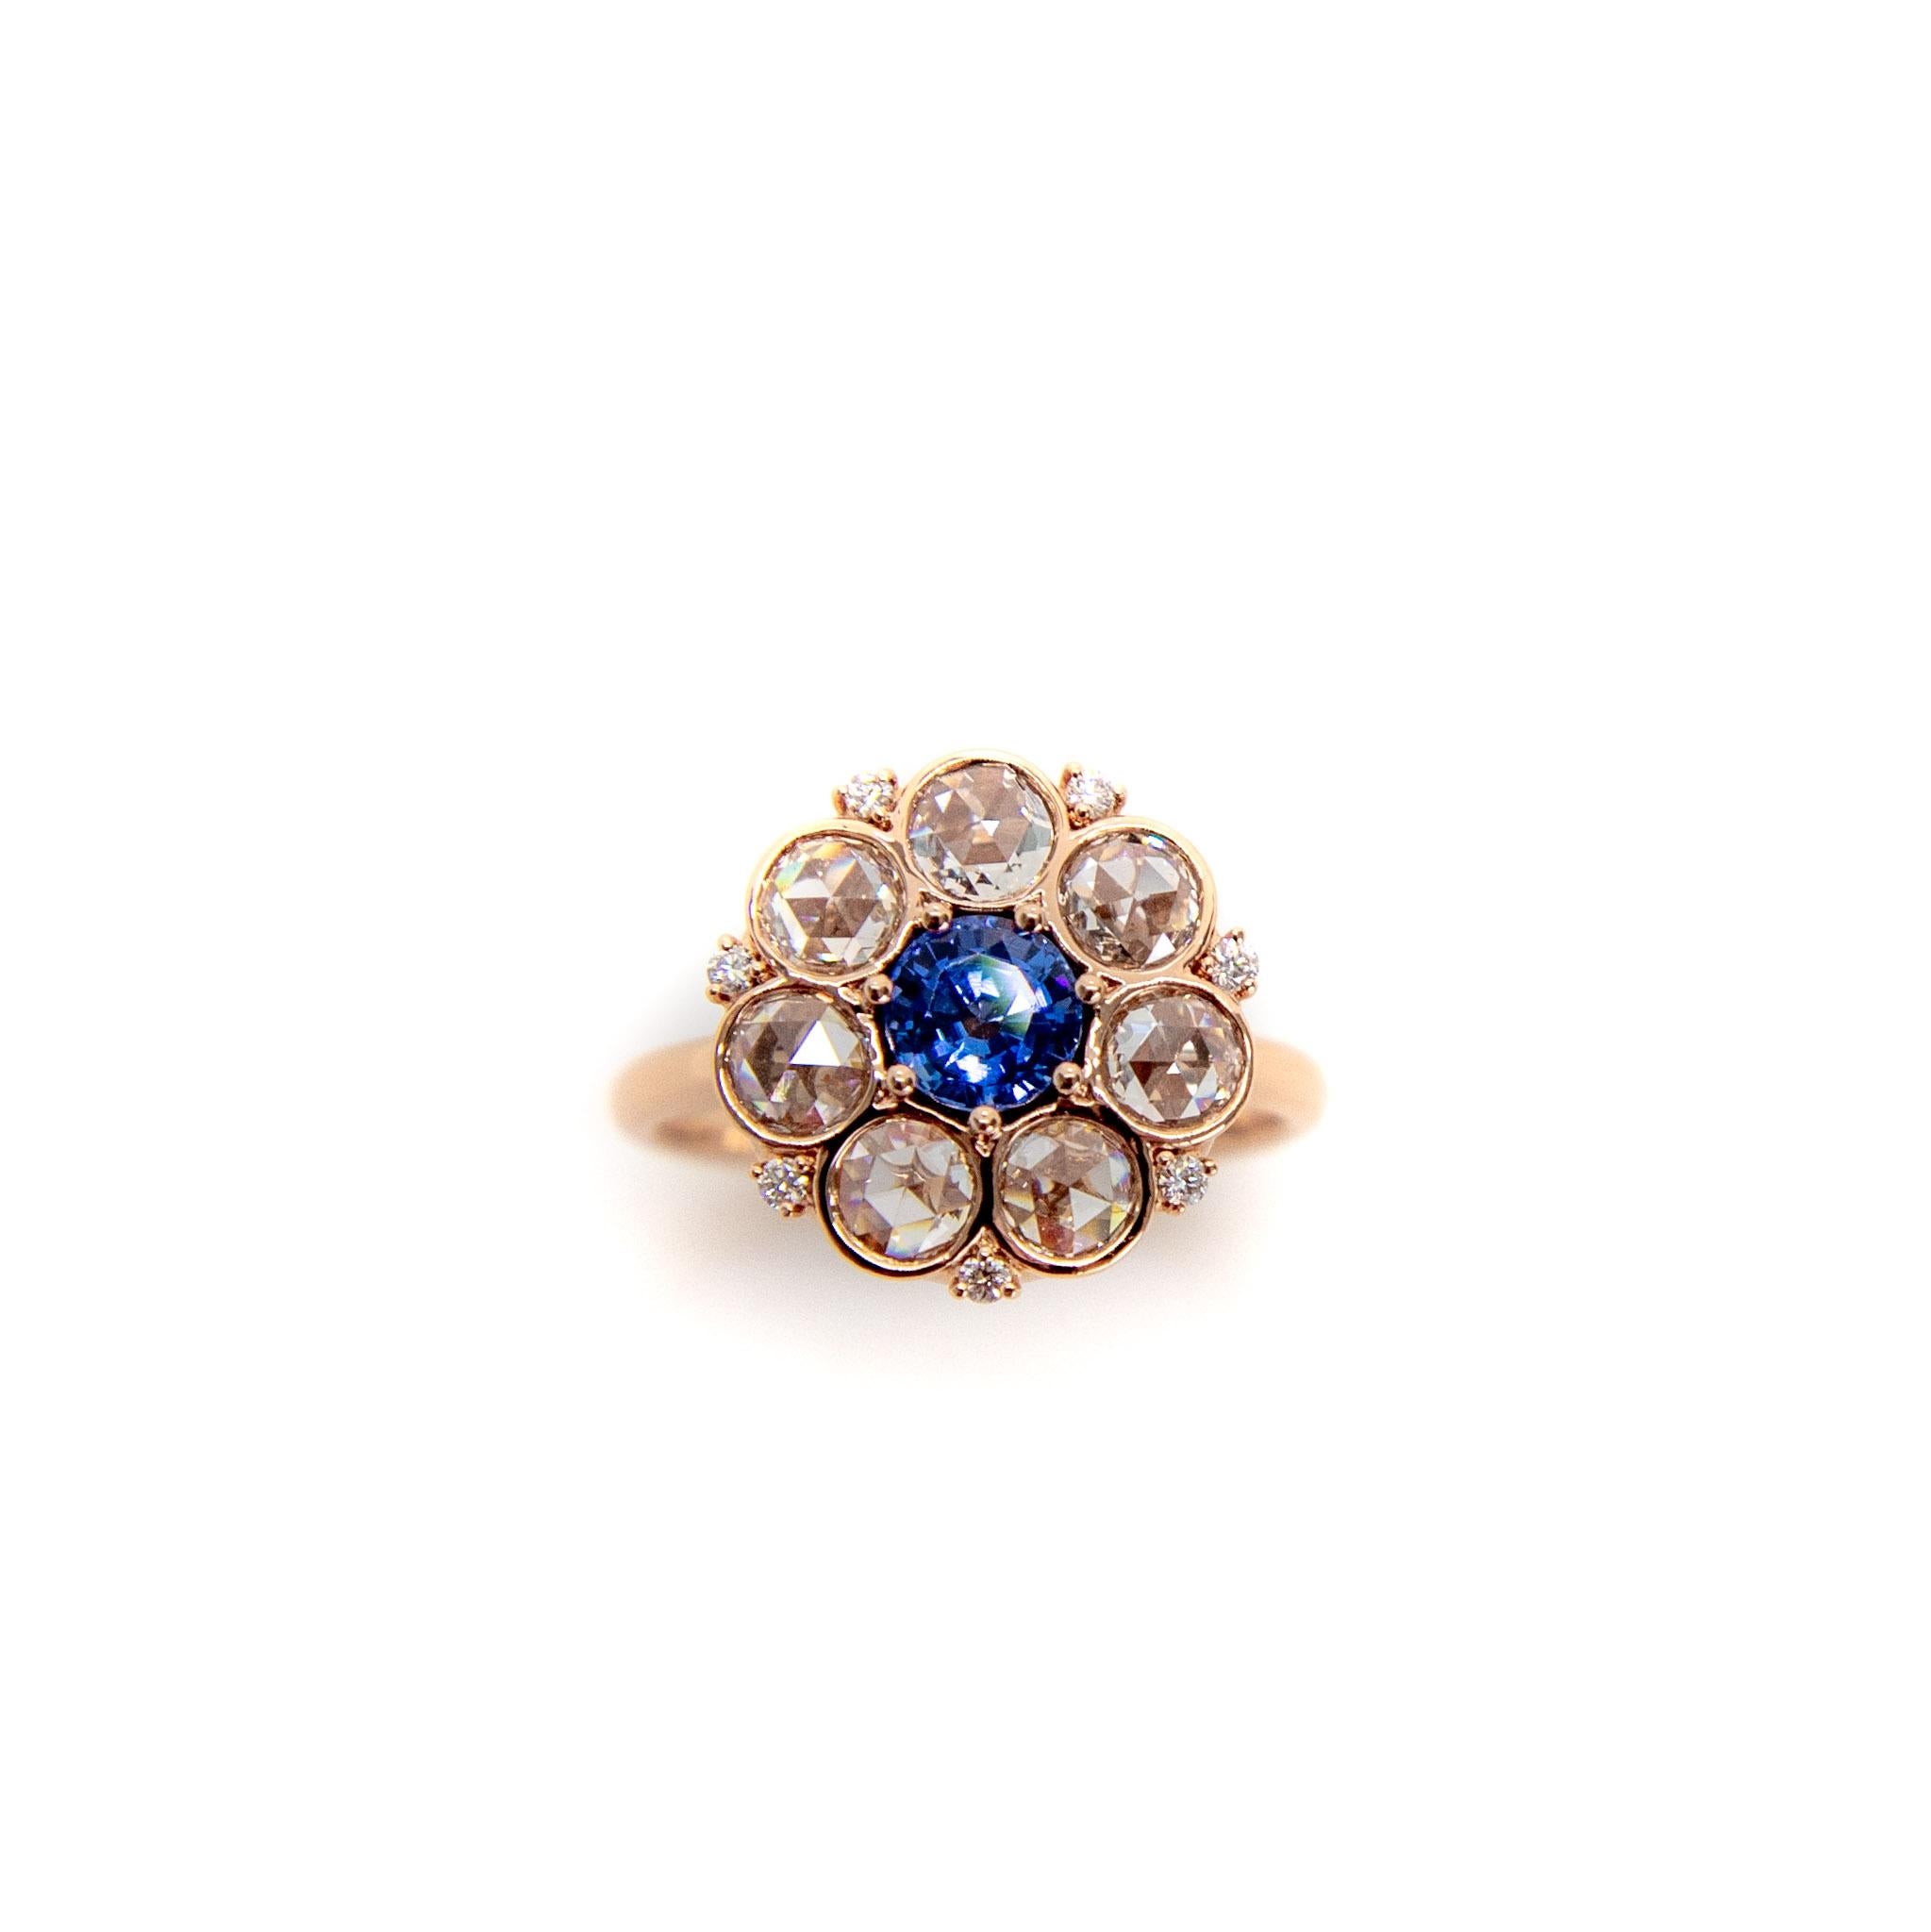 Beautiful Sapphire and Rose Cut Diamond Cluster Ring with ornate gallery setting made to order. 
Ring has a romantic antique feel about it with incredible sparkle of rose cut diamonds and blue sapphire. 

Shown here:
0.83ct Blue Sapphire.
1.19ct